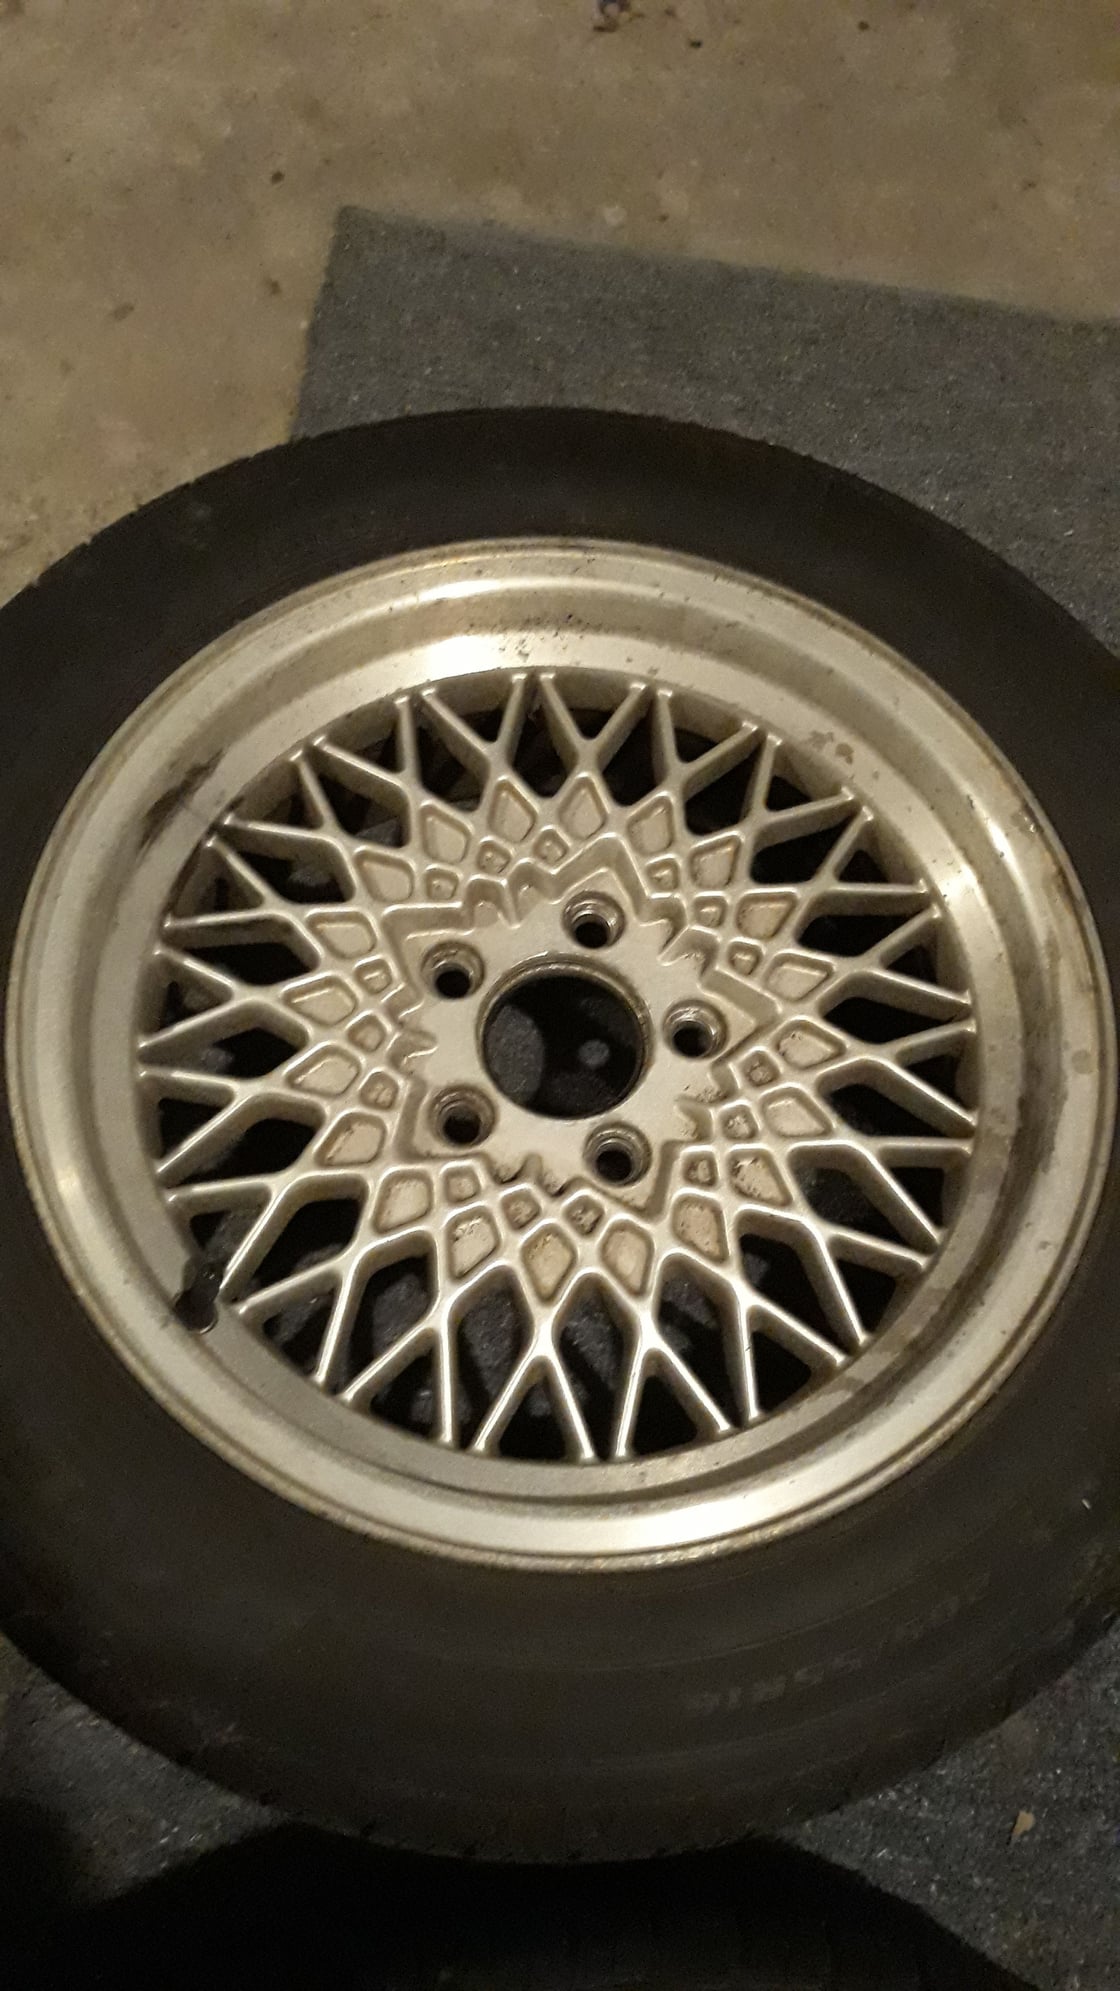 Wheels and Tires/Axles - Crown vic wheels - Used - Clifton, NJ 7014, United States